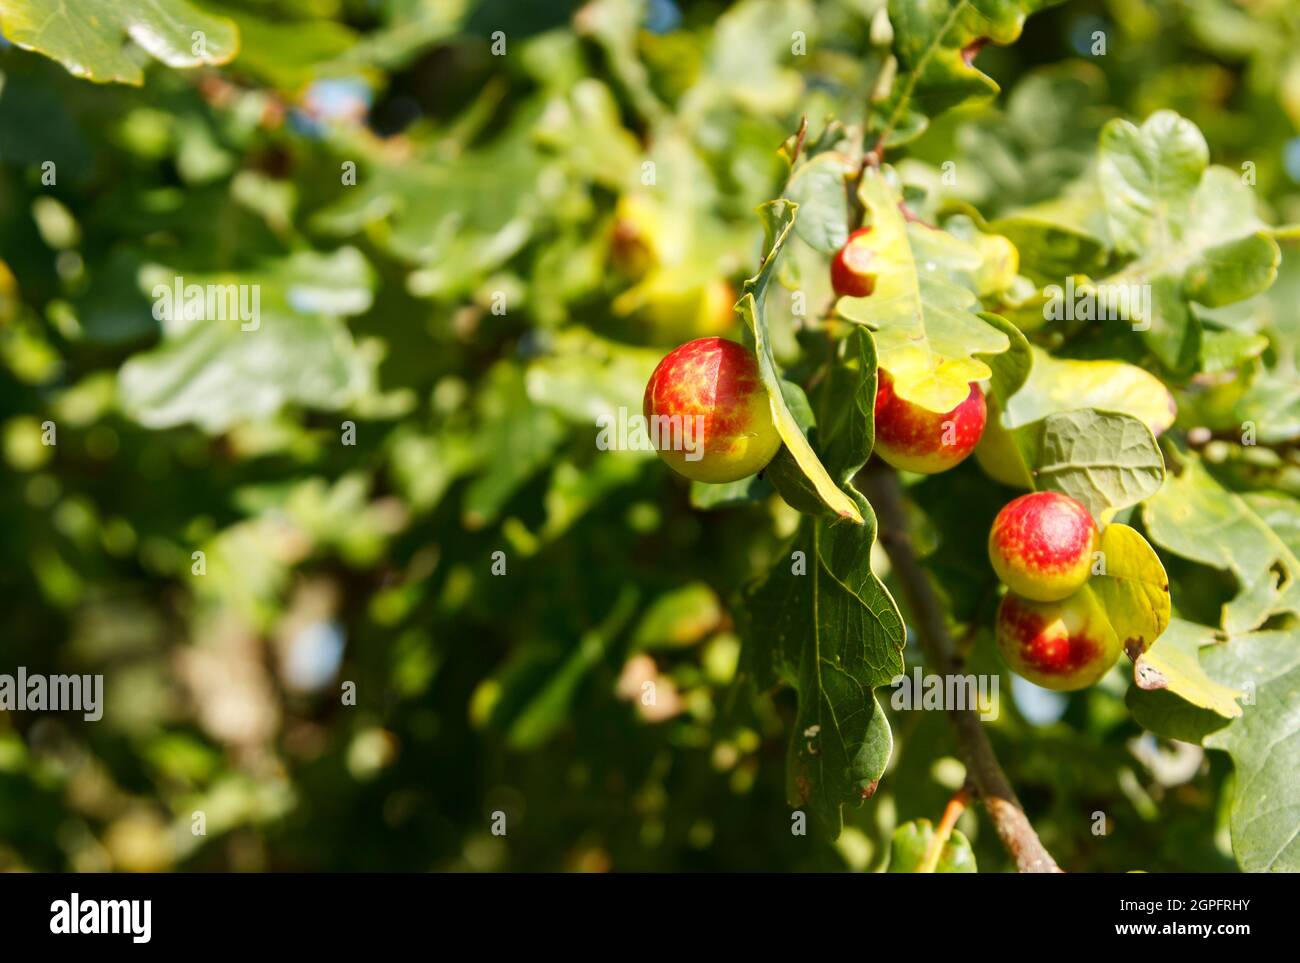 fruits of the pedunculate oak in the forest on sunny autumn day Stock Photo